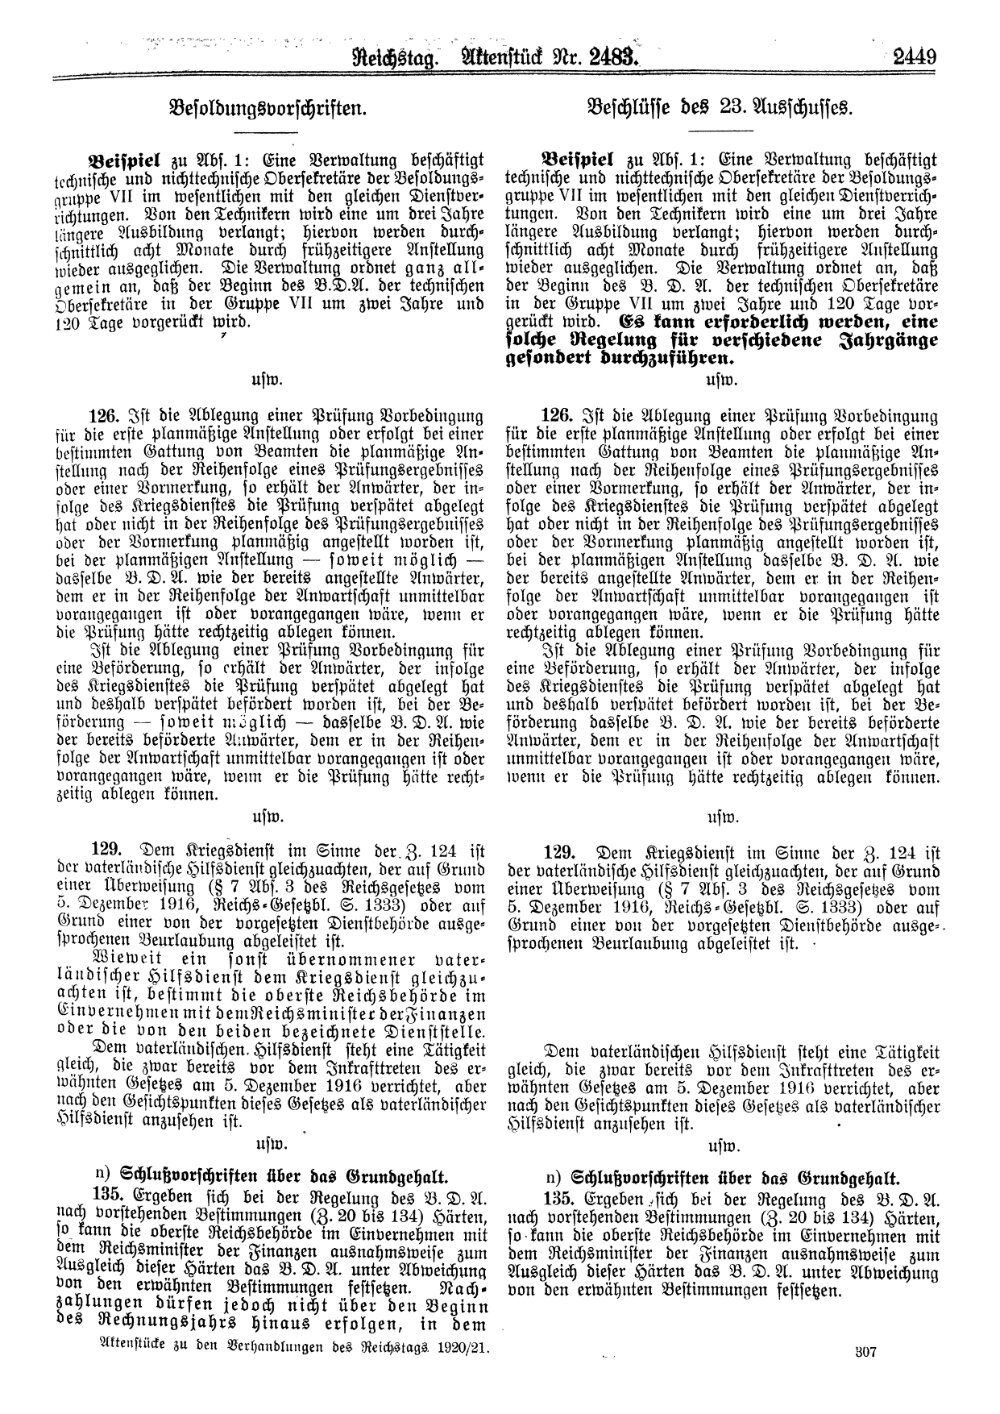 Scan of page 2449